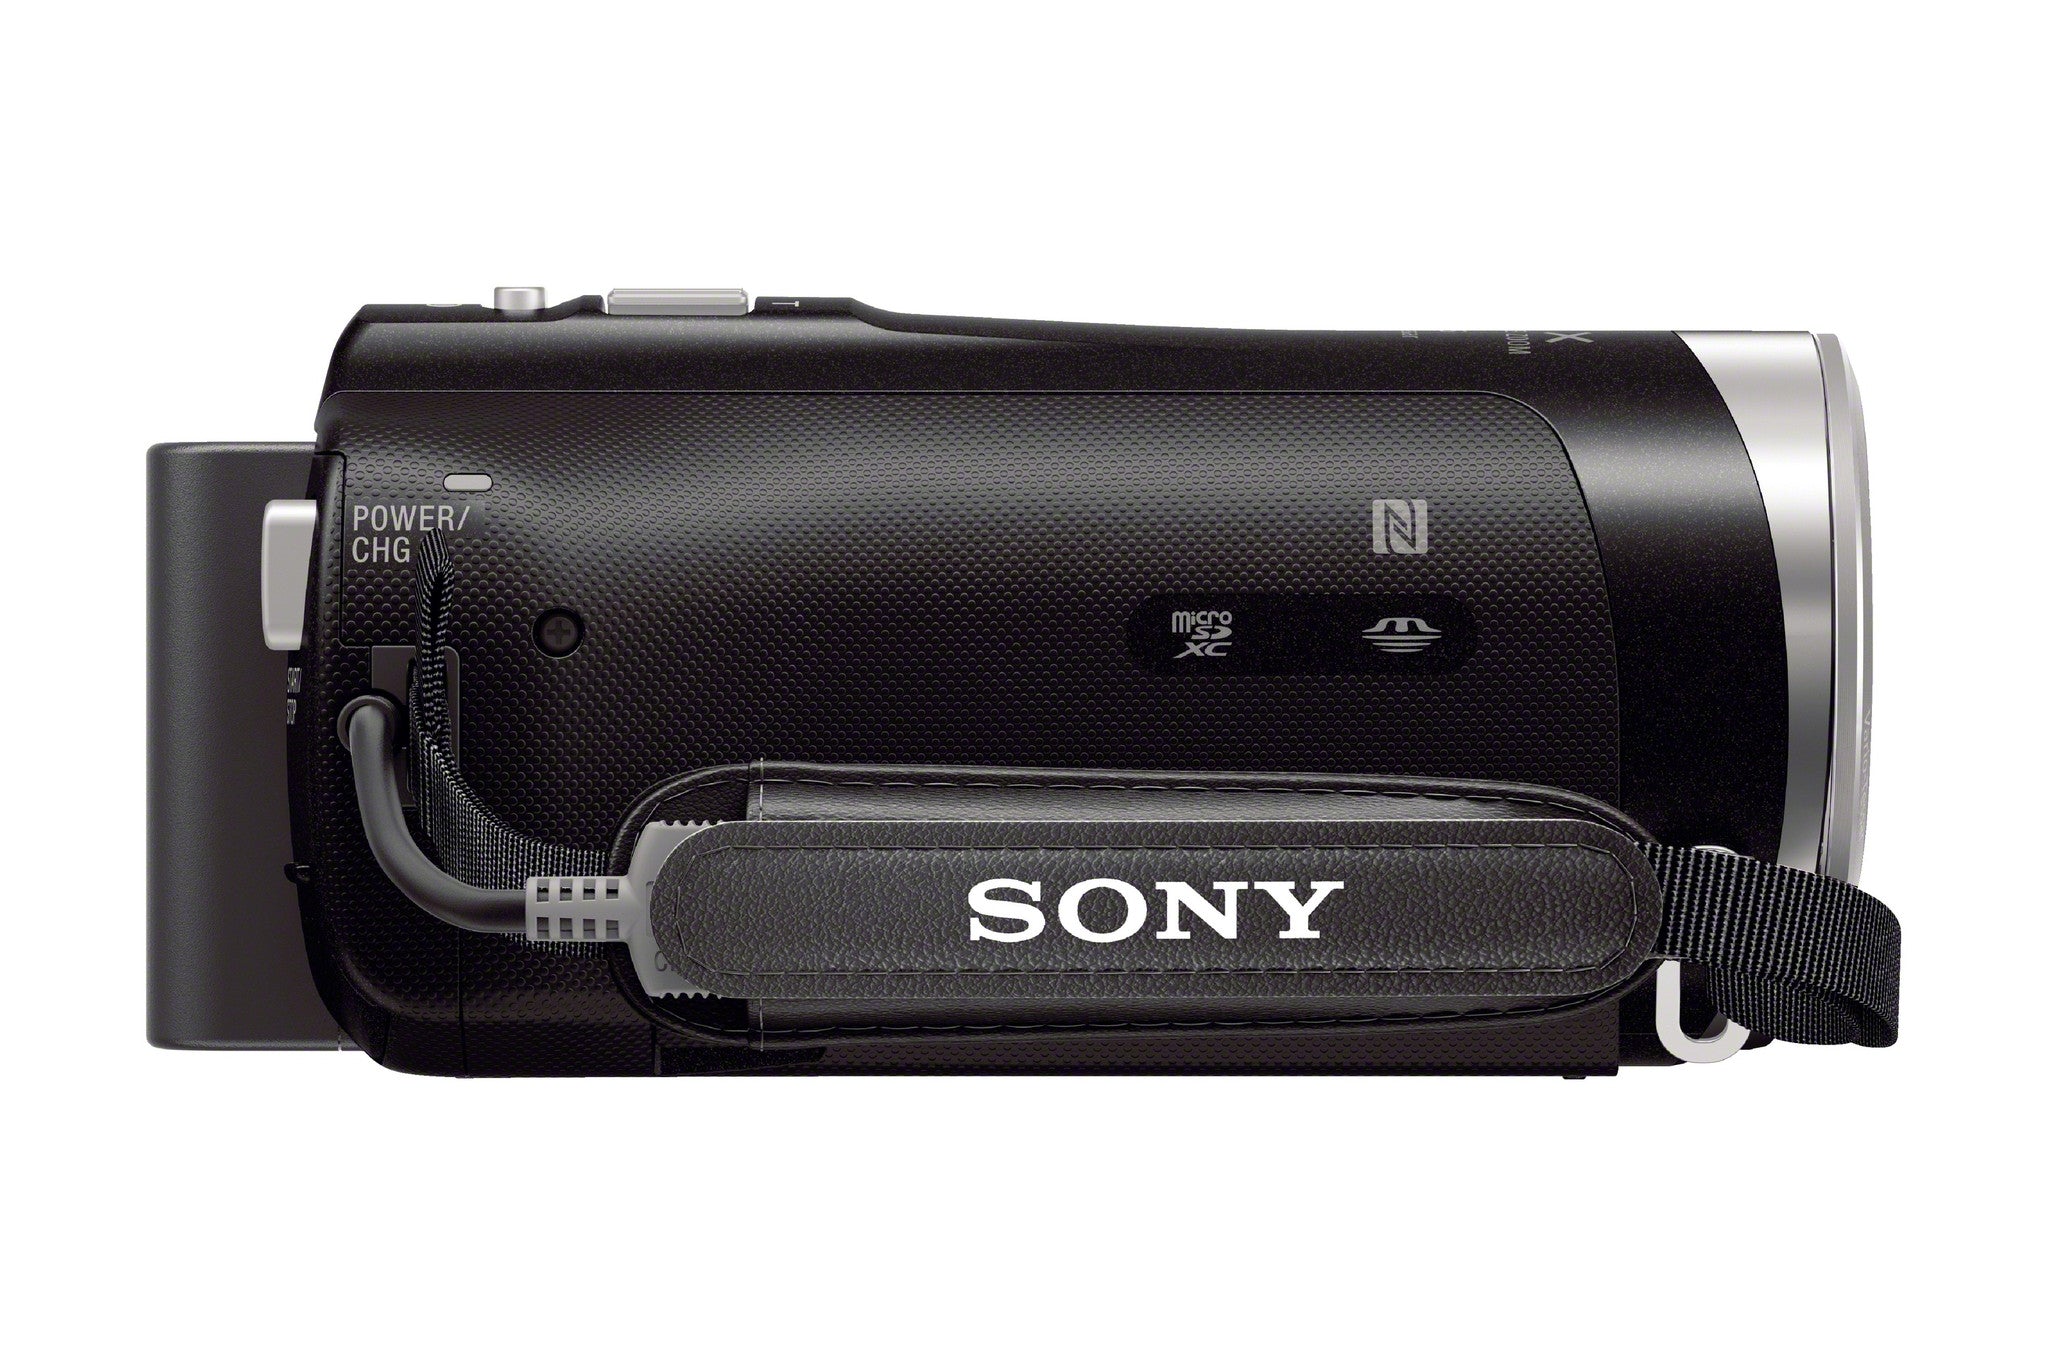 Sony HDR-CX455 Full HD Handycam Camcorder, video camcorders, Sony - Pictureline  - 7